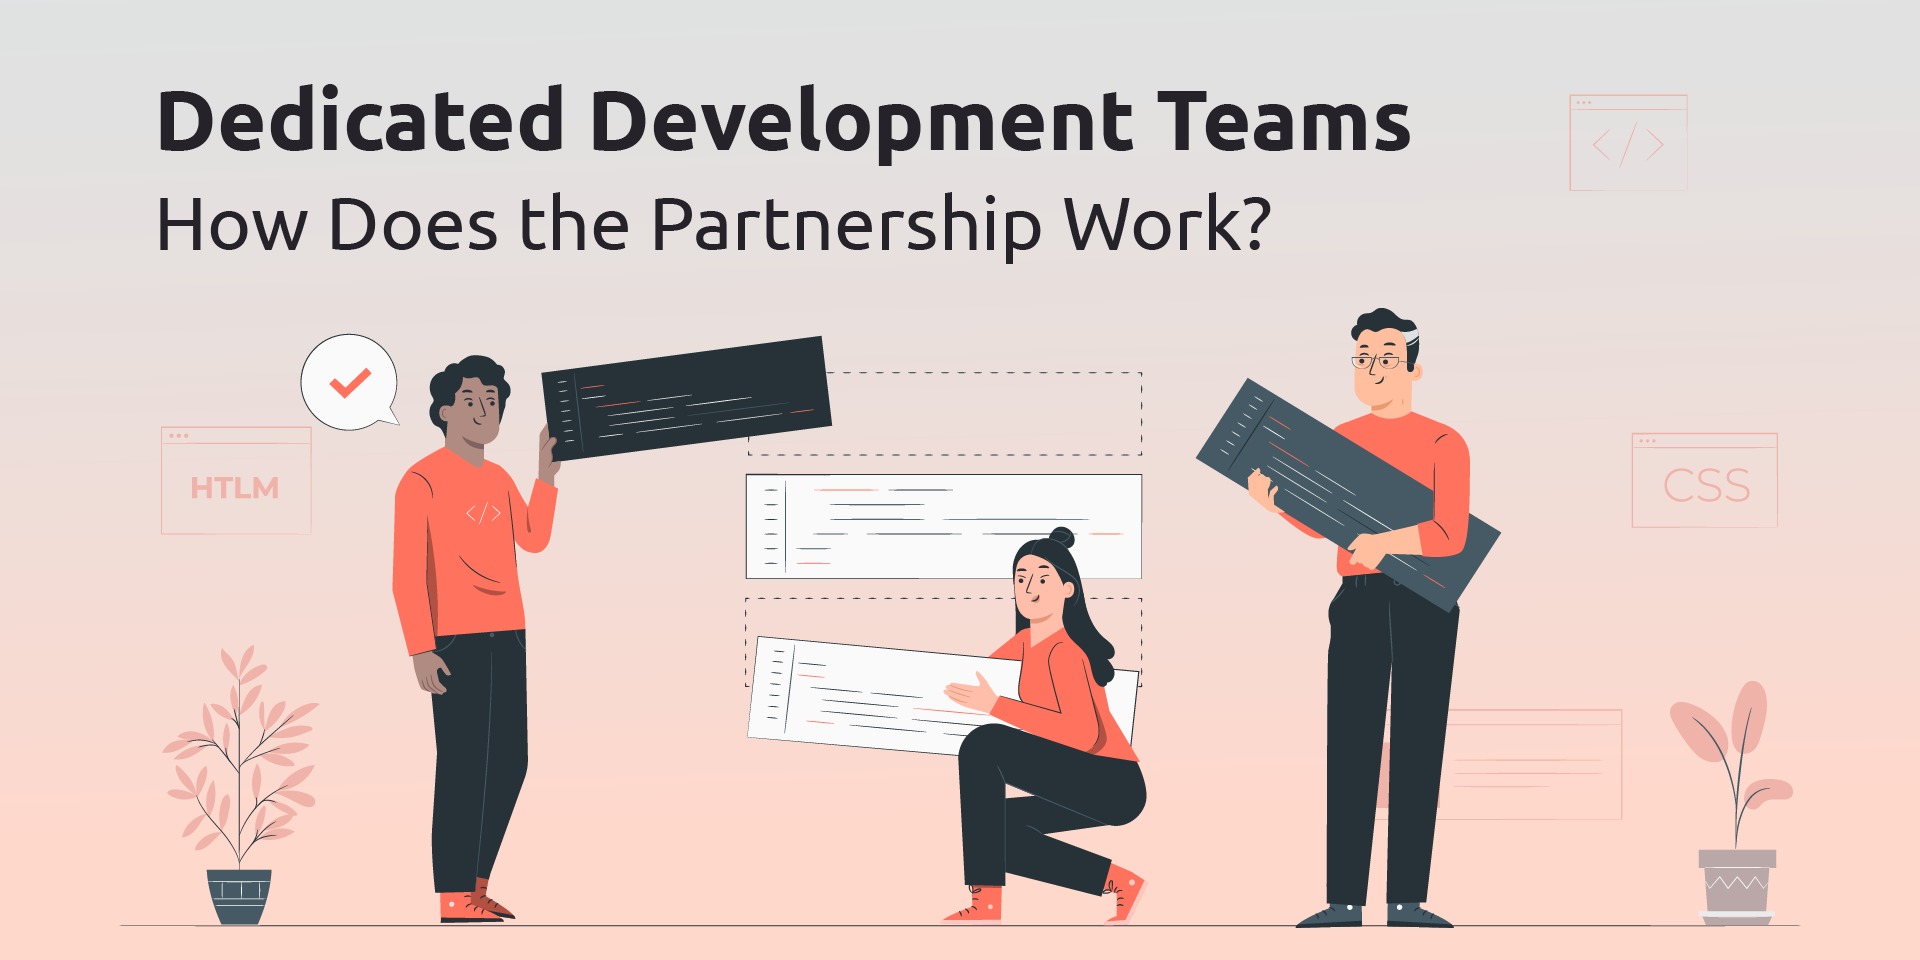 Dedicated Development Teams. How Does the Partnership Work